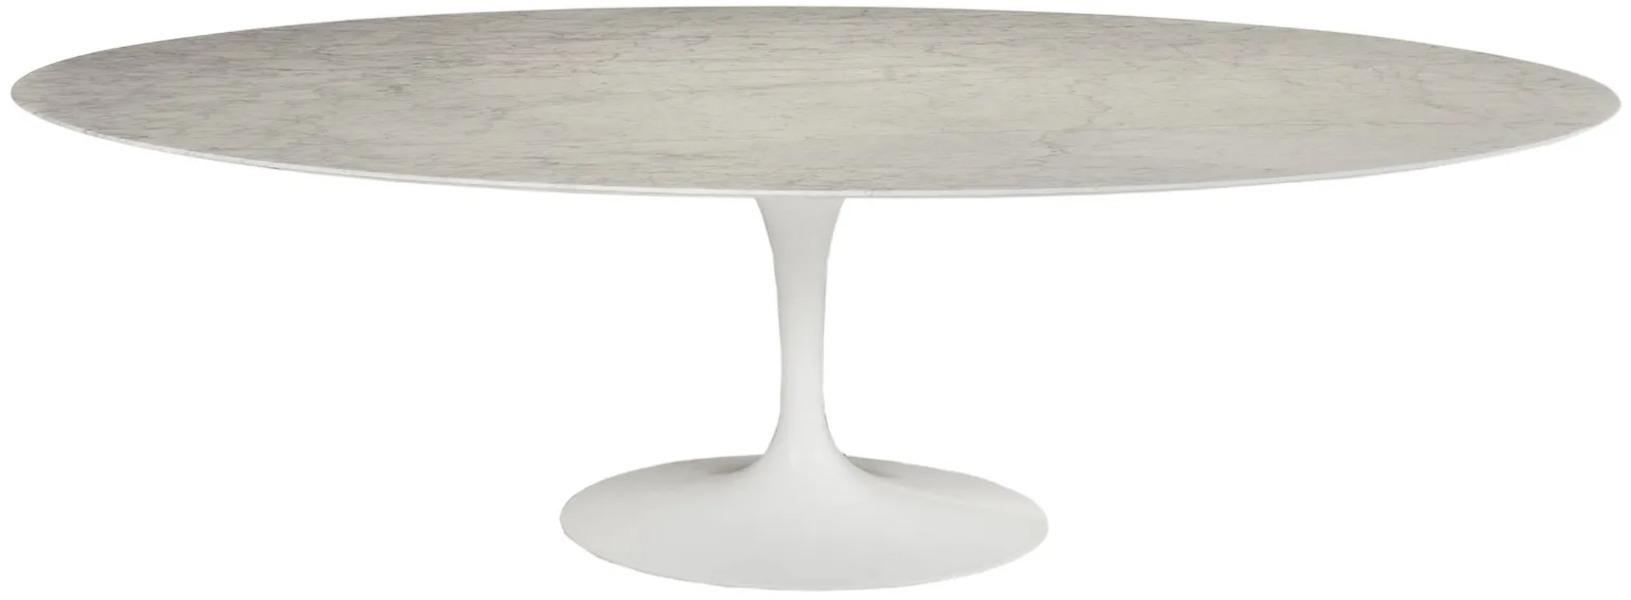 An Eero Saarinen white marble top Pedestal dining table for Knoll, sometimes referred to as a Tulip table as it had a similar base to his Tulip chairs, made $8,000 plus the buyer’s premium in November 2021. Image courtesy of Brunk Auctions and LiveAuctioneers.